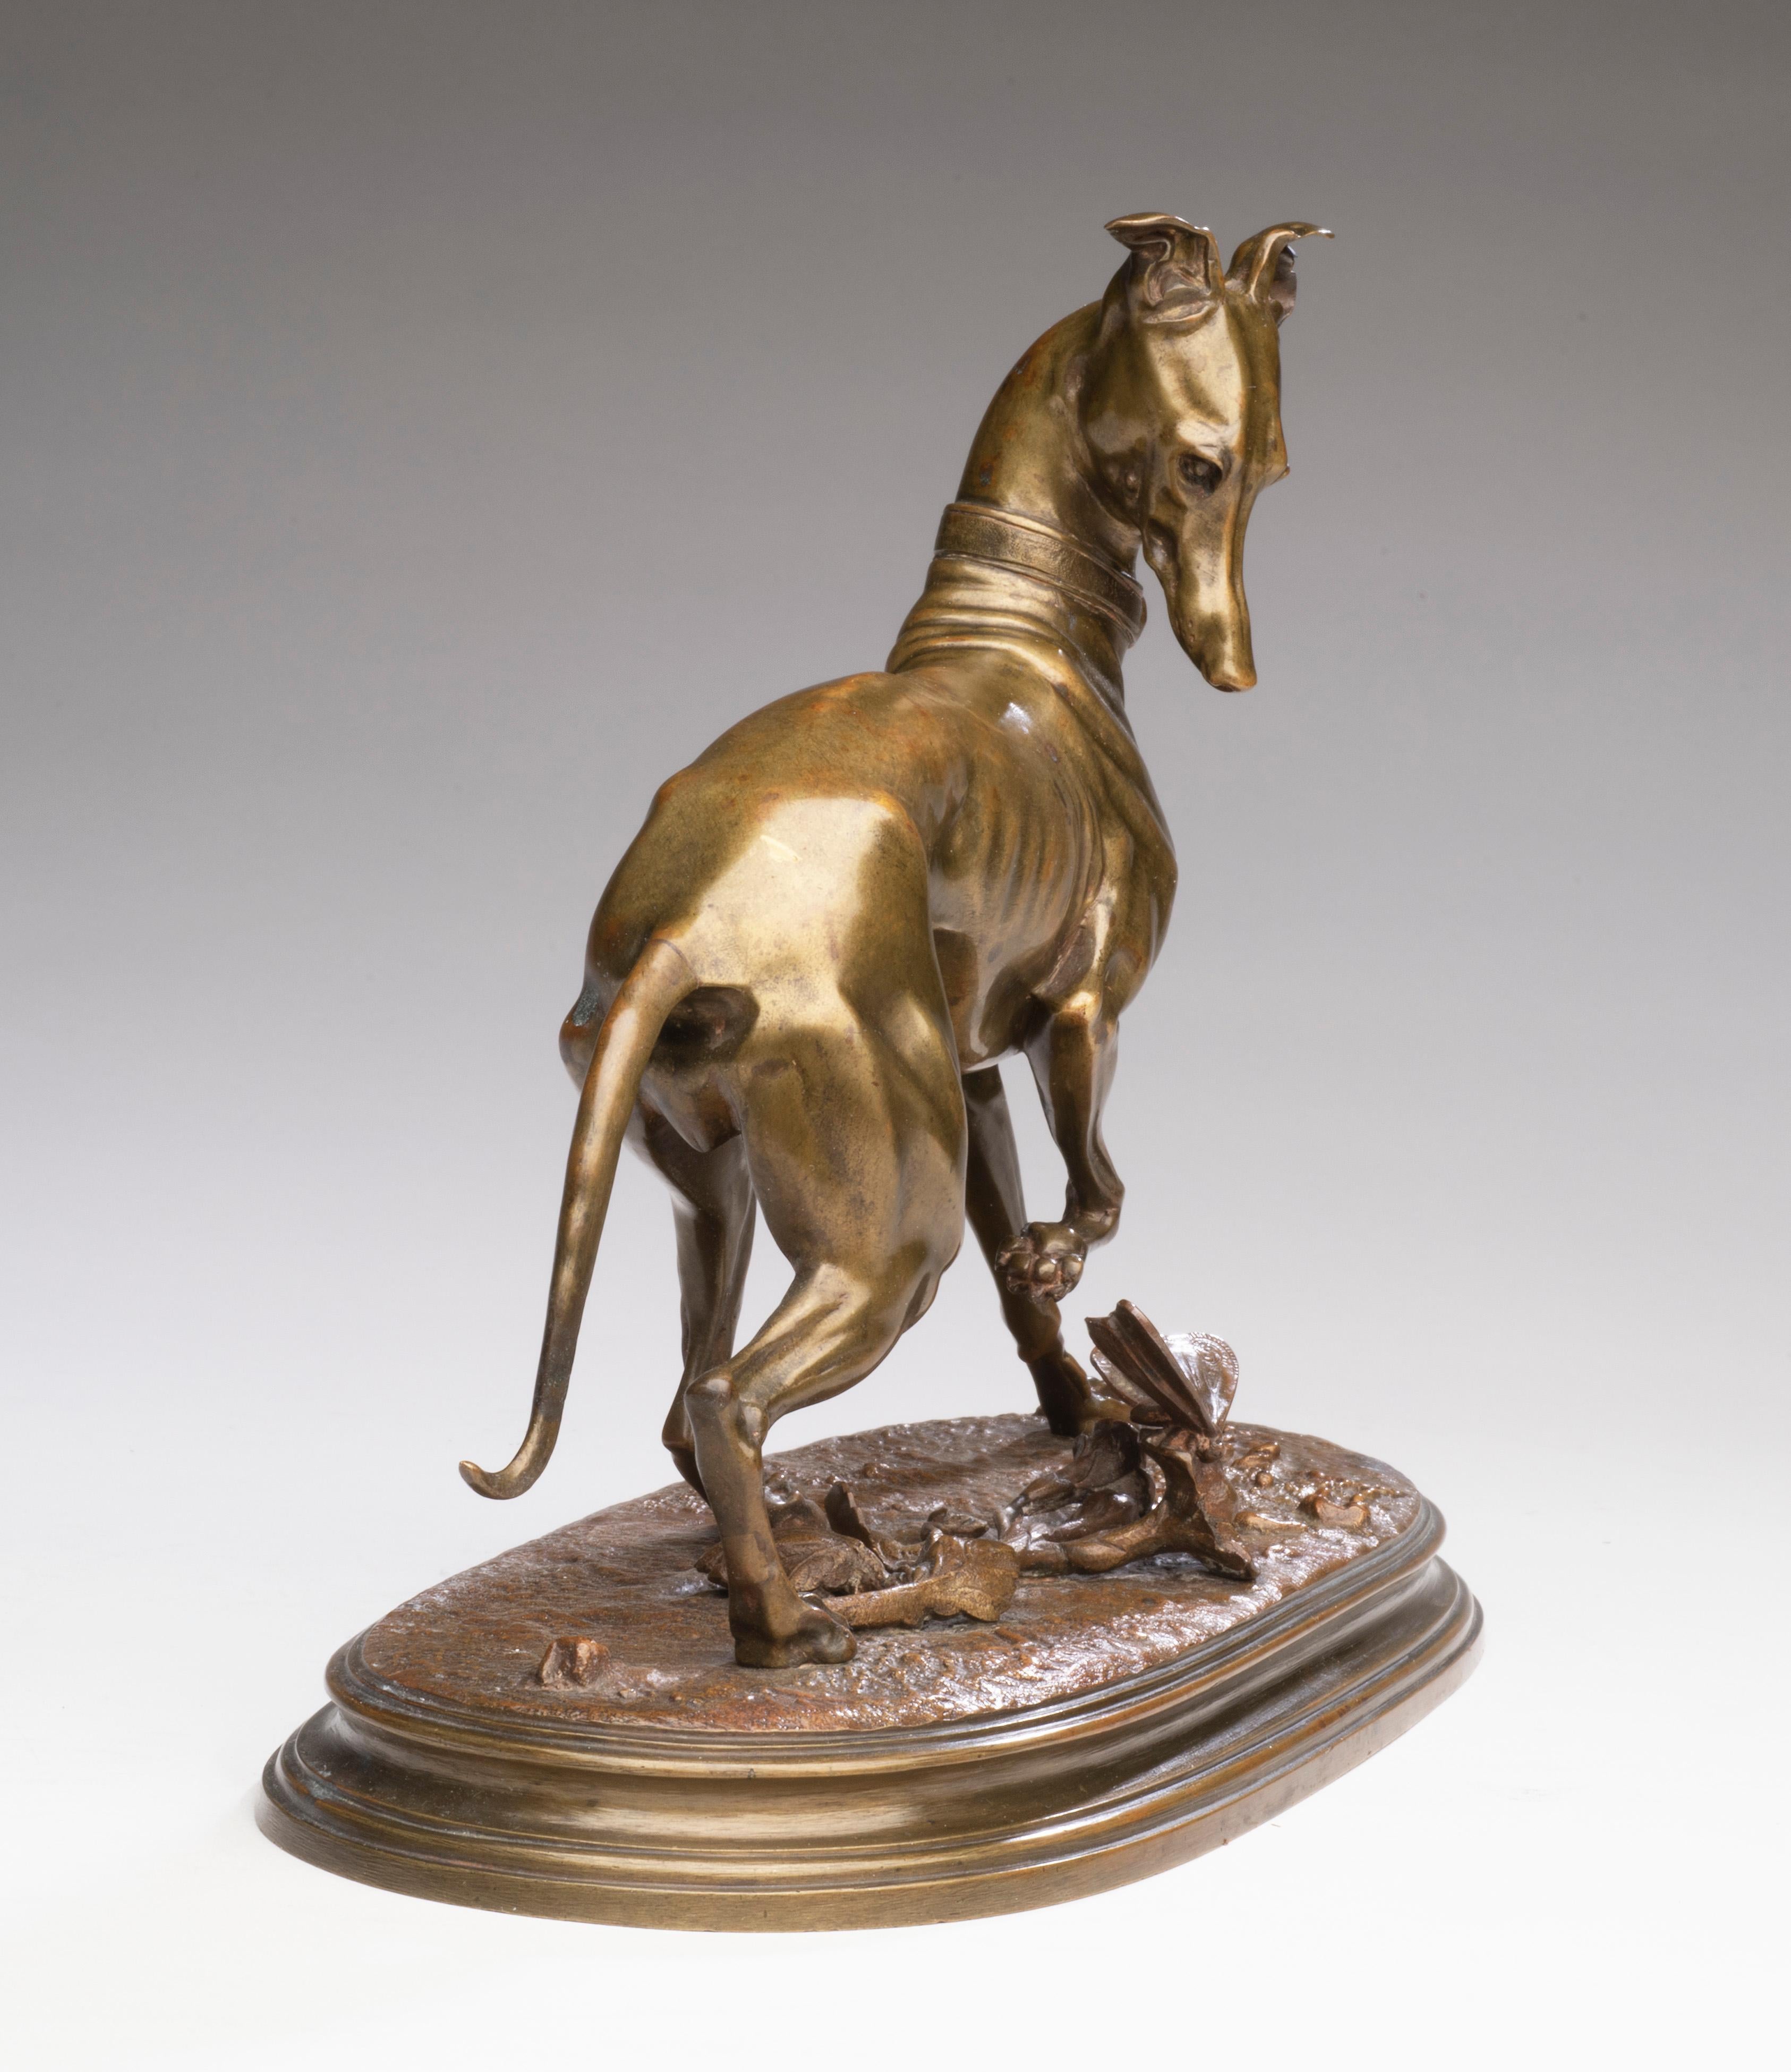 Antique Bronze Dog Portrait 
“La Levrette au Papillon” or “Whippet (Greyhound) with a Butterfly”  
Arthur Waagen (Germany, France 1833-1898)
Circa 1860’s
11 x 8 x 4  inches
(1 of 2. Not a pair.)

Arthur Waagen was a German-born sculptor and